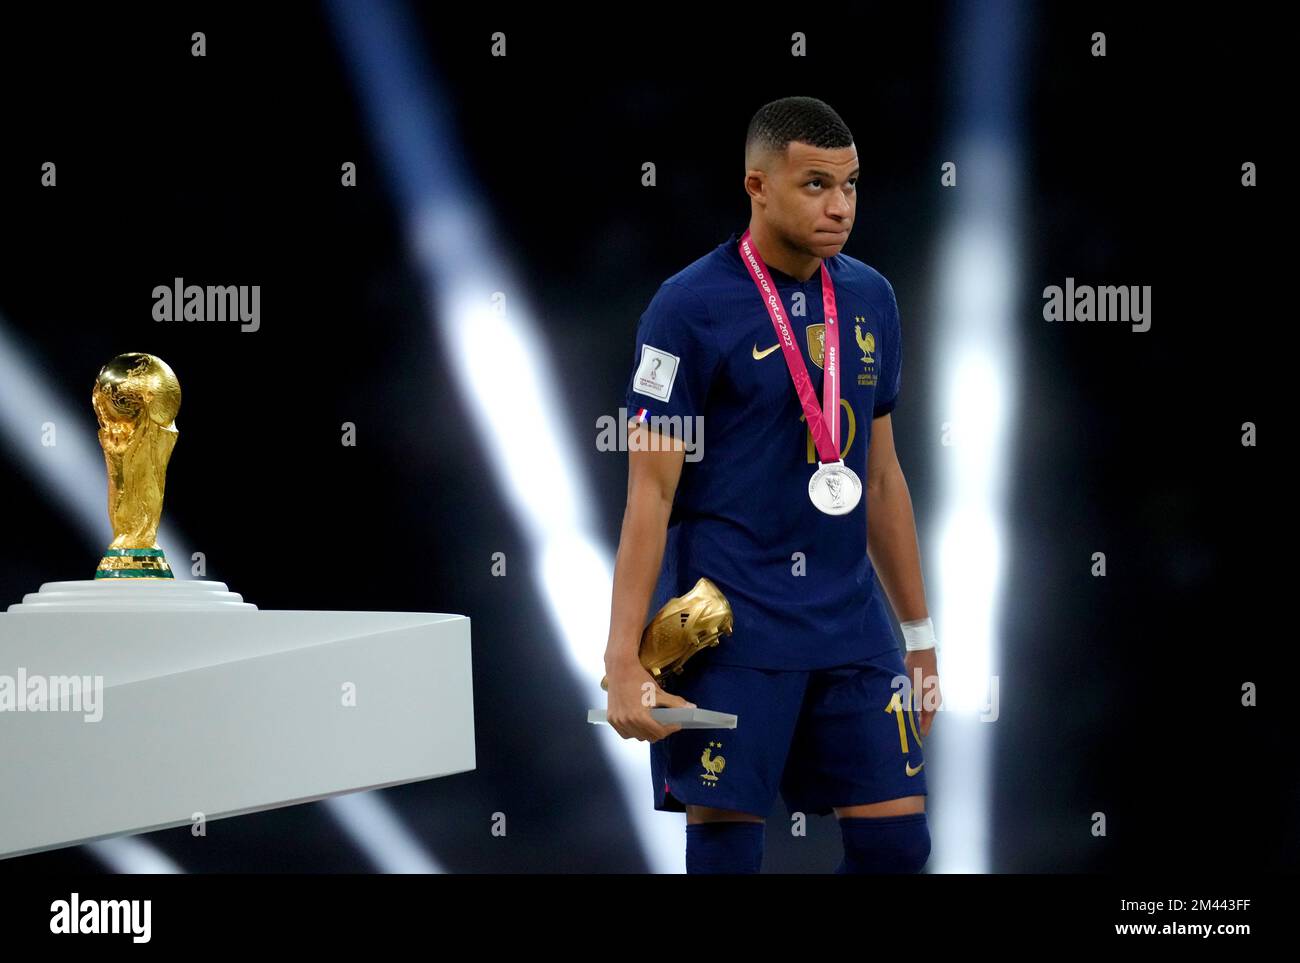 France's Kylian Mbappe walks past the FIFA World Cup trophy after being presented with his second place medal following defeat in the FIFA World Cup final at Lusail Stadium, Qatar. Picture date: Sunday December 18, 2022. Stock Photo